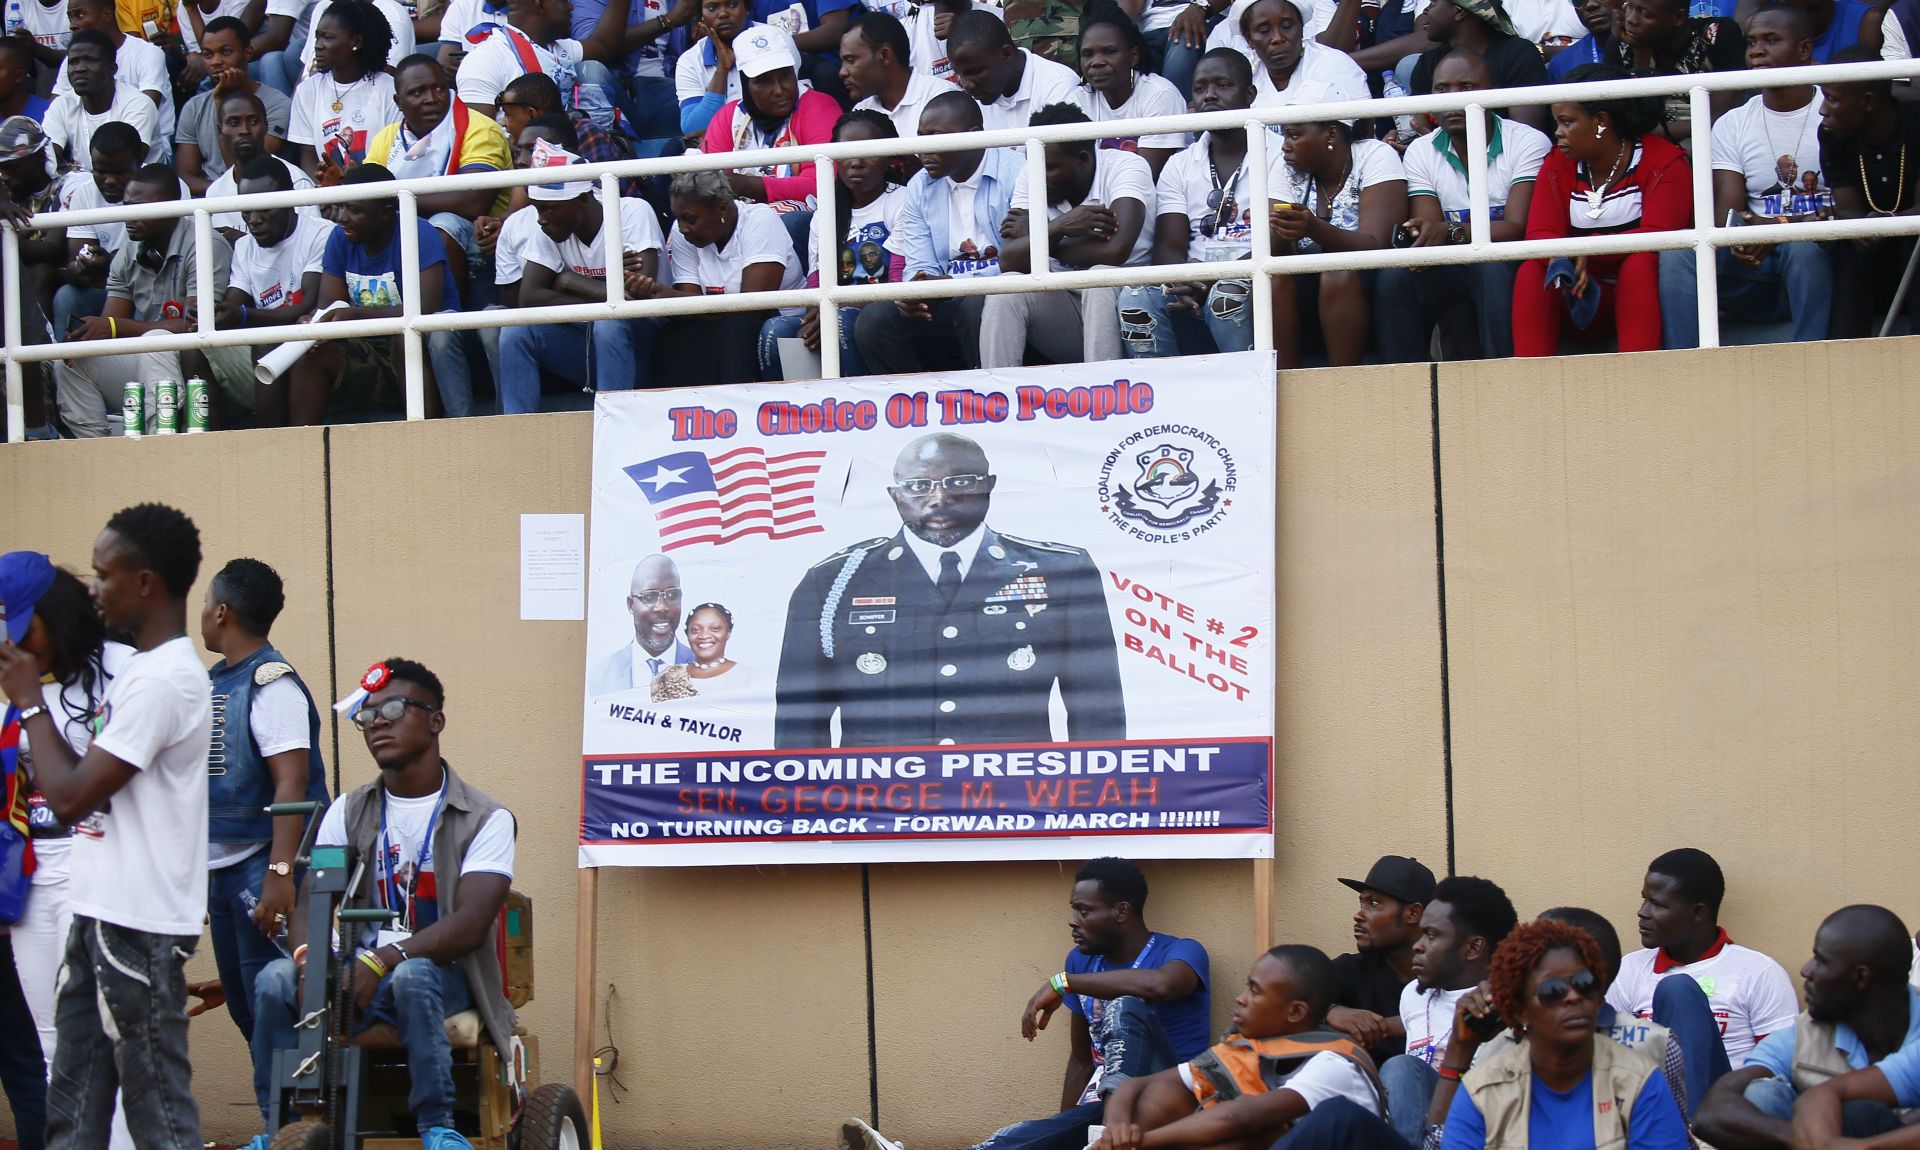 epa06404394 Campaign poster of  George Weah, presidential candidate  the opposition  Coalition for  Democratic Change (CDC),  cheers during closing   of campaigns  at the Samuel Kanyon Doe Sports Complex in Monrovia,  Liberia, 23 December 2017. Liberians go to the polls on 26 December, in  run-off presidential elections to choose between George Weah, presidential candidate of the Coalition for Democratic Change (CDC), and Joseph Nyuma Boakai, presidential candidate and incumbent vice president, representing the governing Unity party (UP) to succeed Ellen Johnson Sirleaf, who  concludes her second and final term of office.  EPA/AHMED JALLANZO